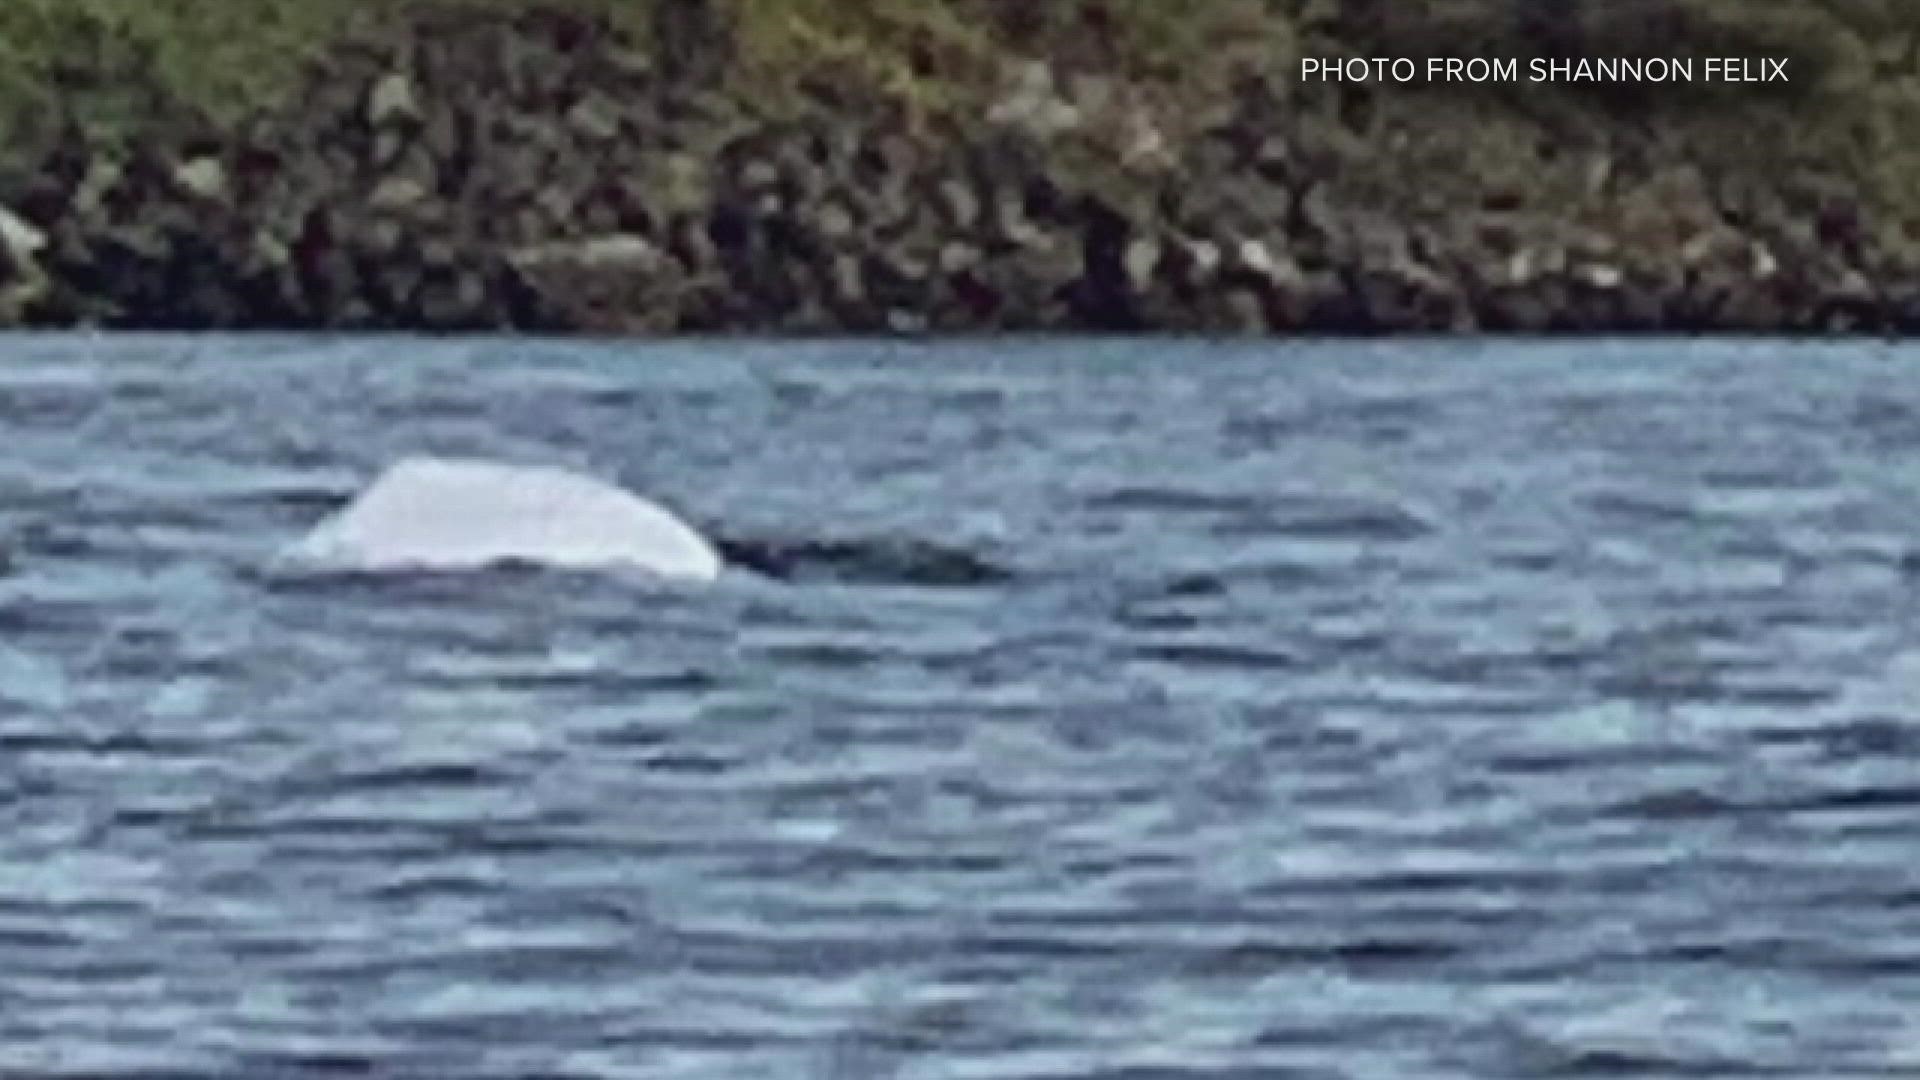 There were two sightings that happened roughly a day apart in Commencement Bay and Elliott Bay.